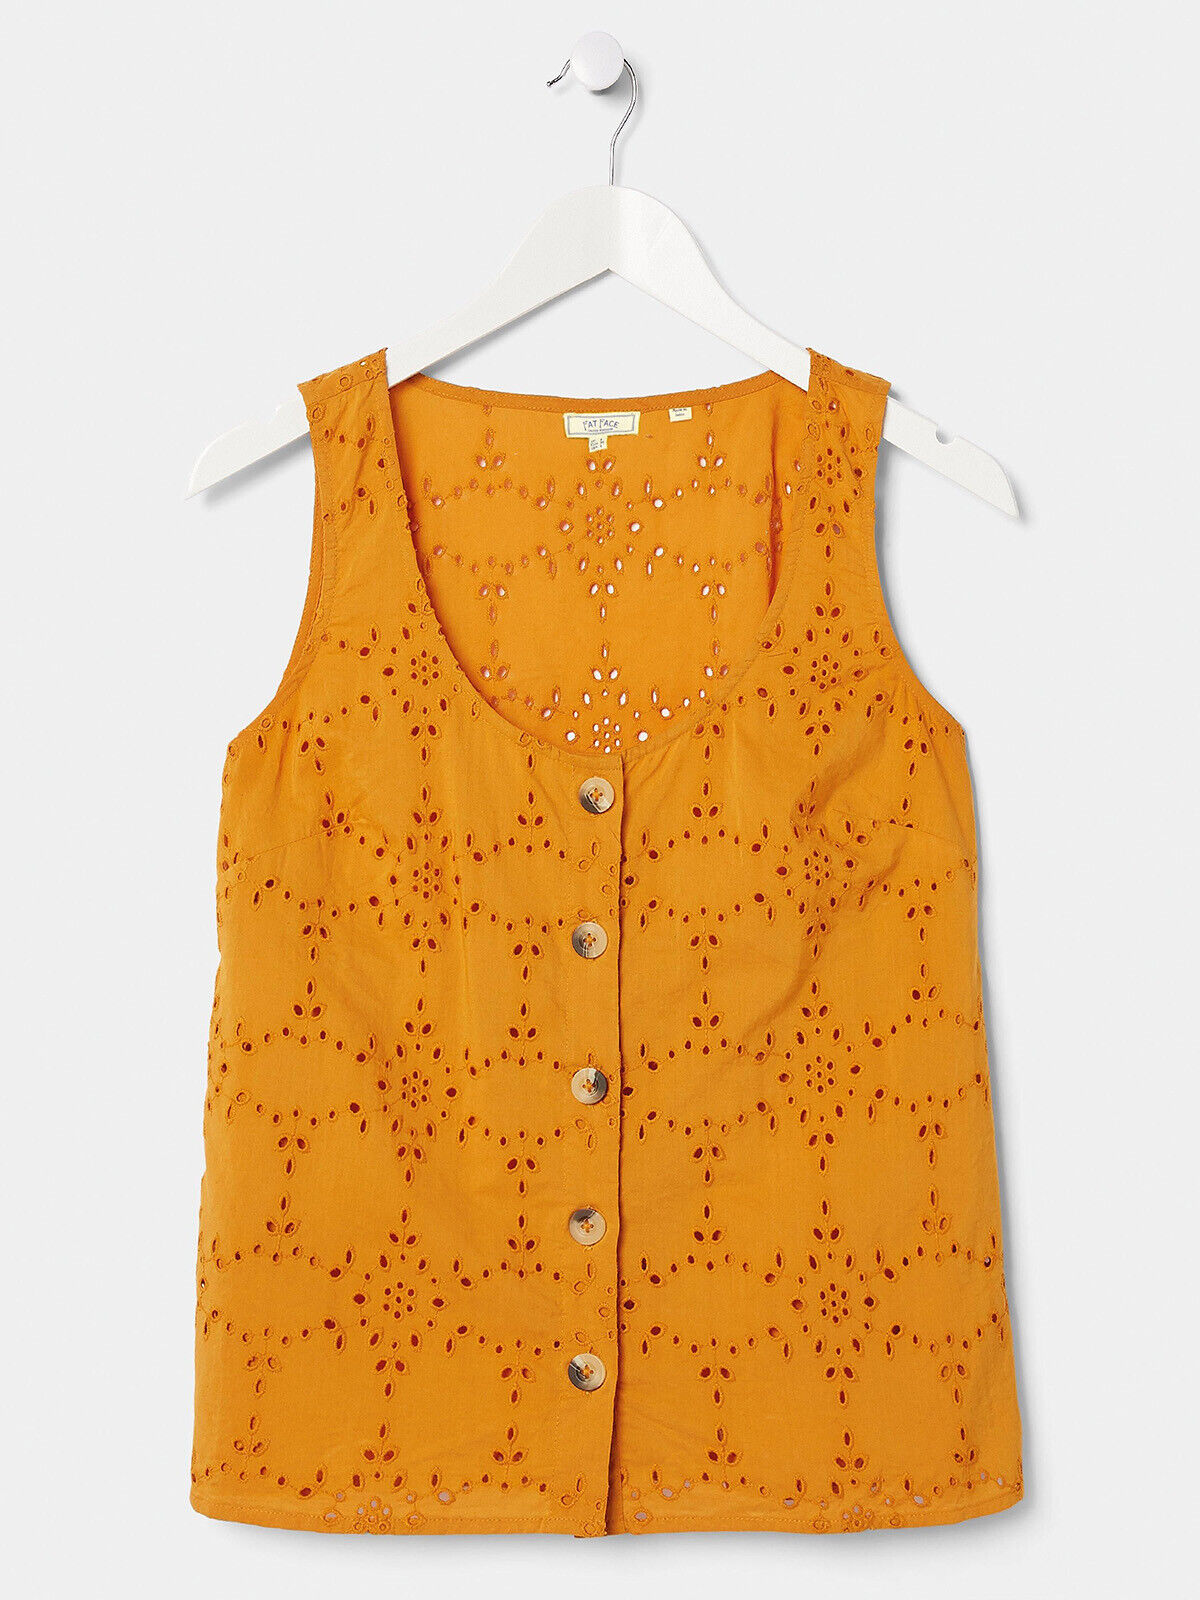 EX Fat Face Ochre Tia Broderie Button Cami in Sizes 12, 14, 16, 18 RRP £35